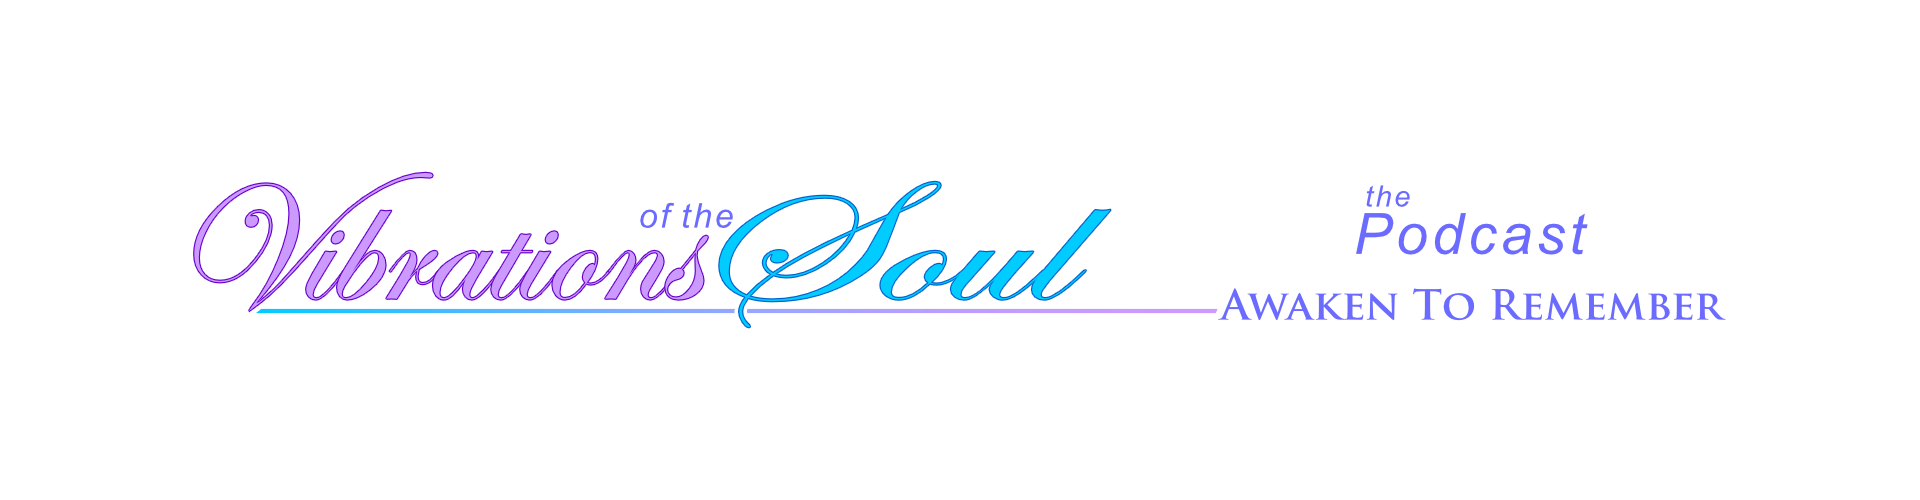 Vibrations of the Soul Podcast